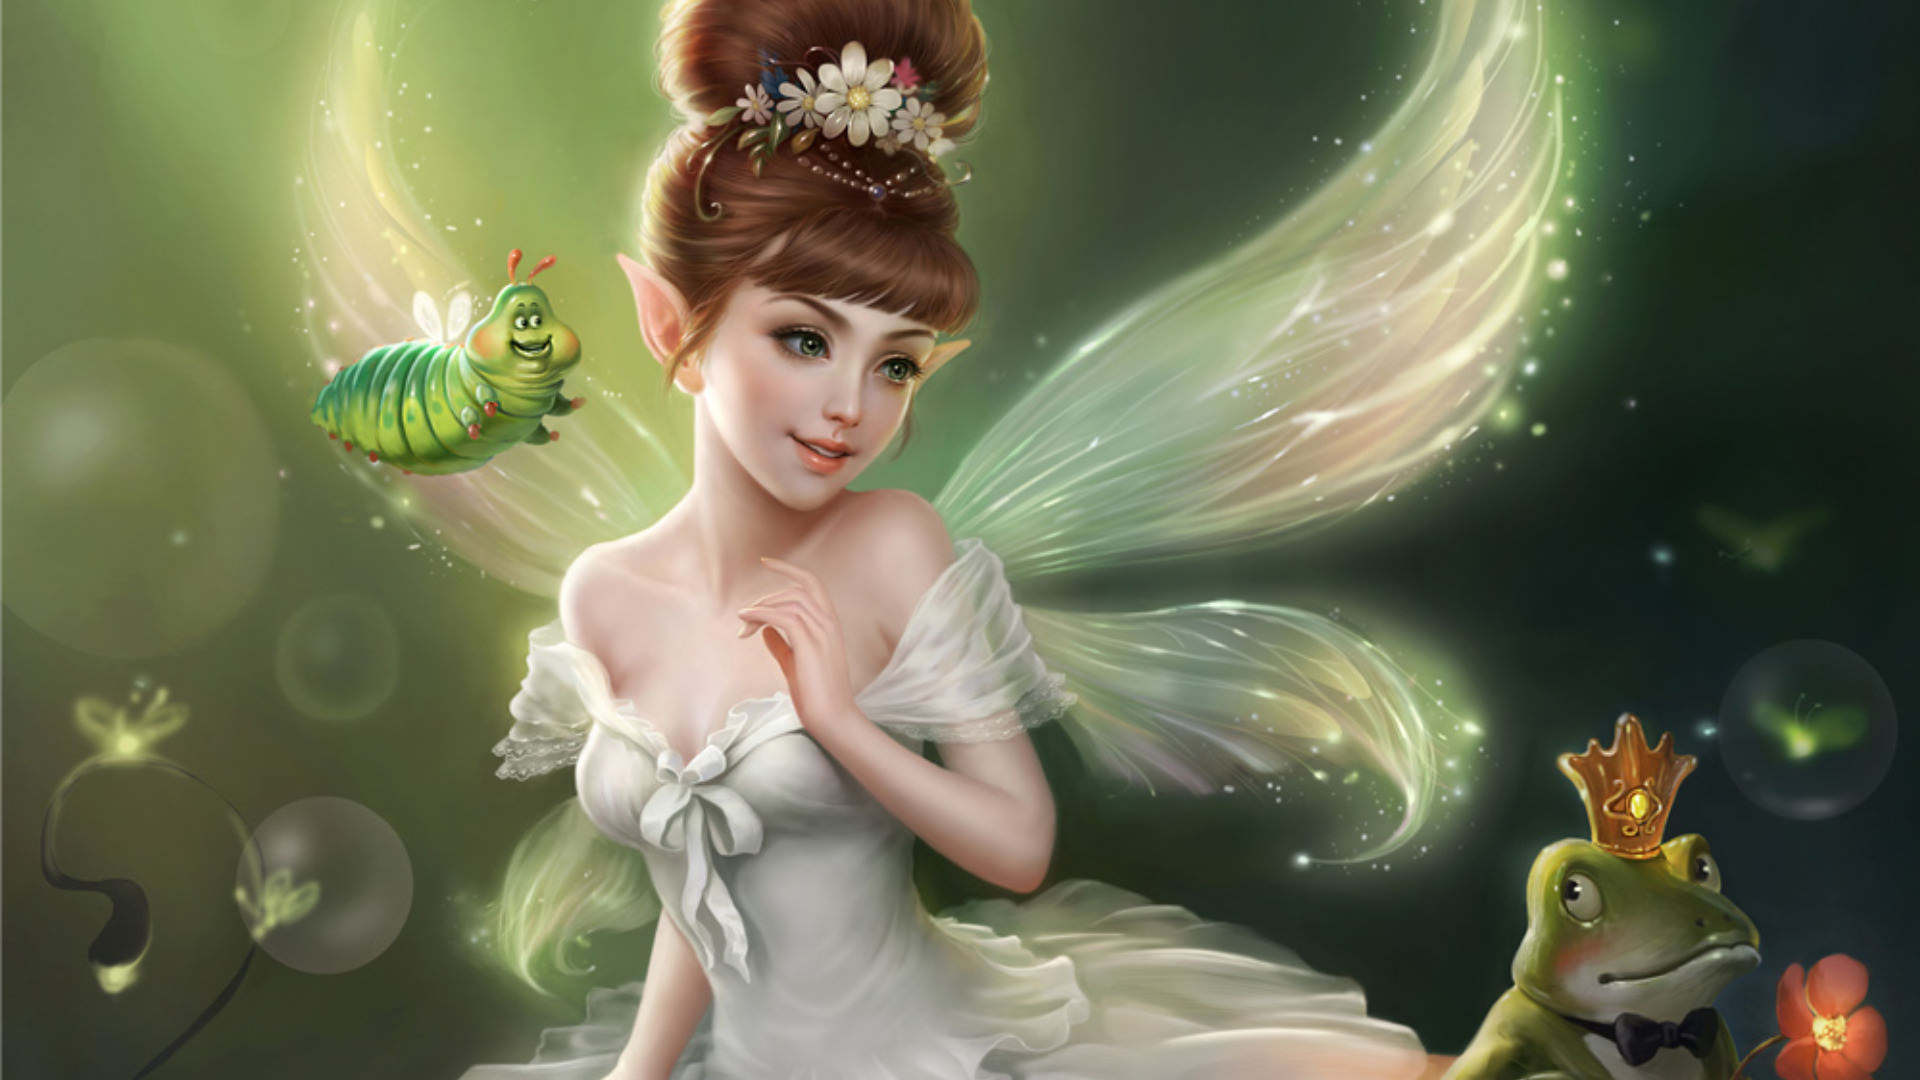 21 Fairy Wallpapers, Fantasy Fairy Backgrounds, Images, Pictures